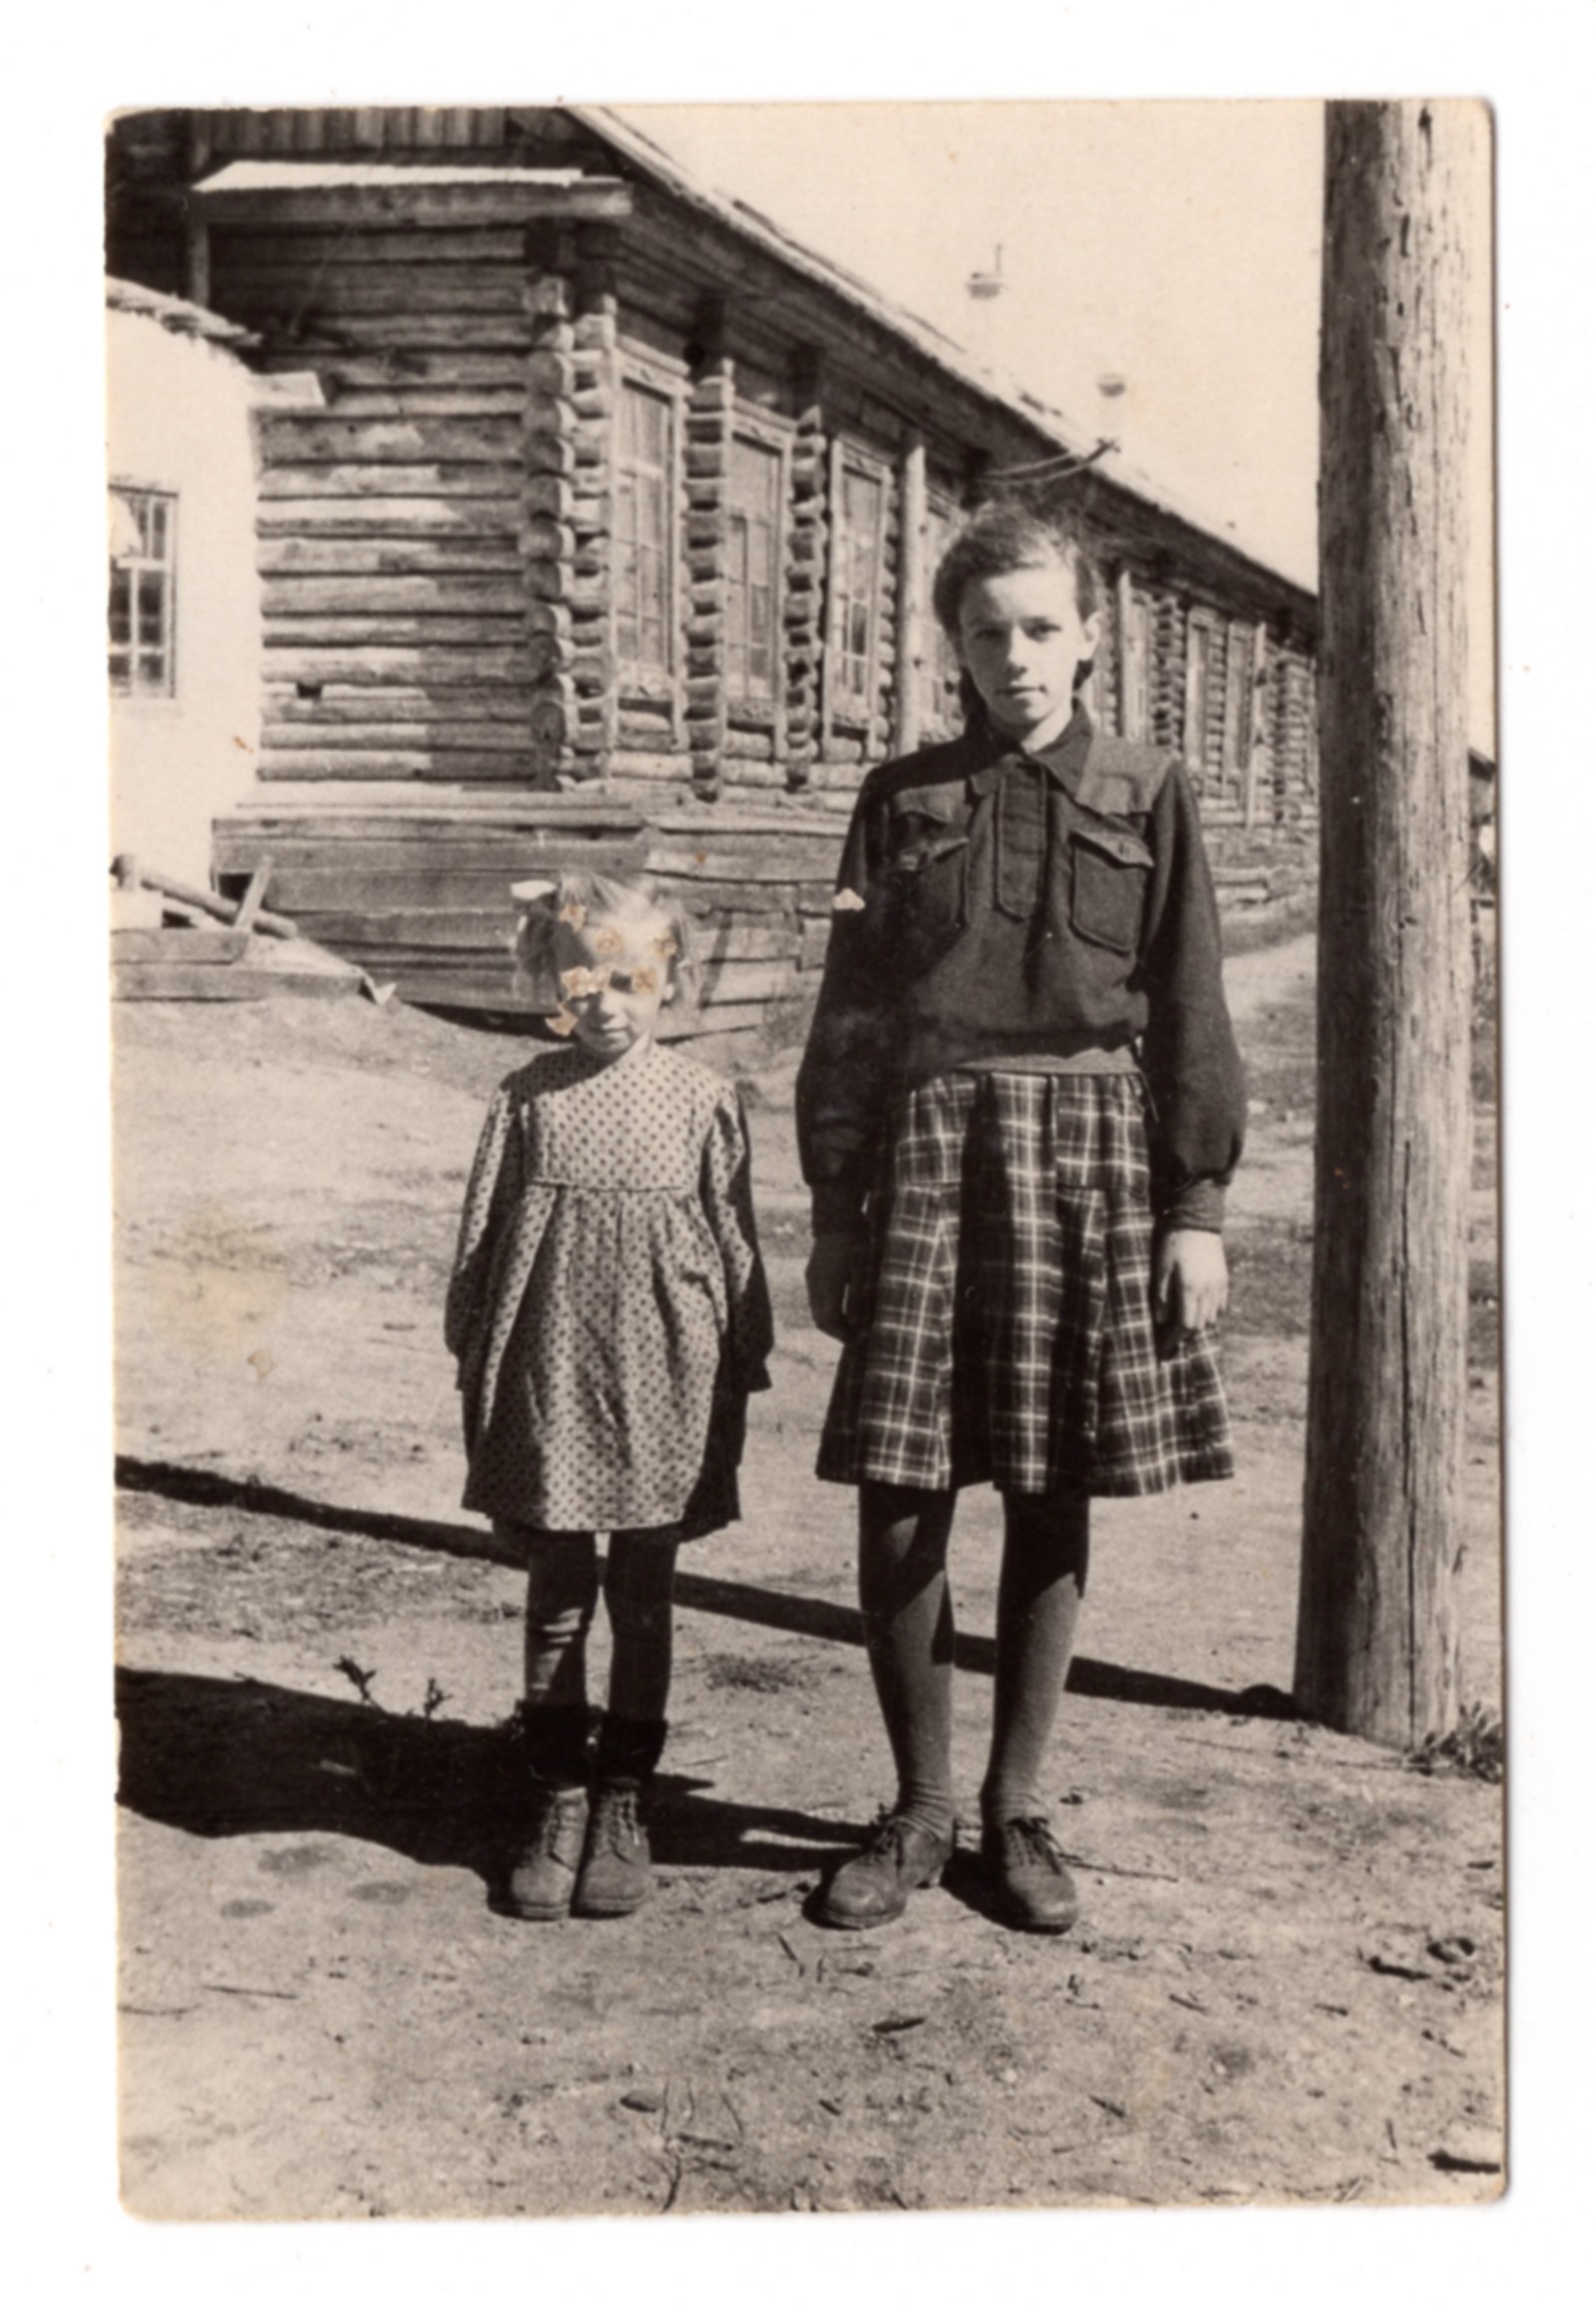 Bohdana and Lavrentiya Talanchuk in front of the barracks, 1950s